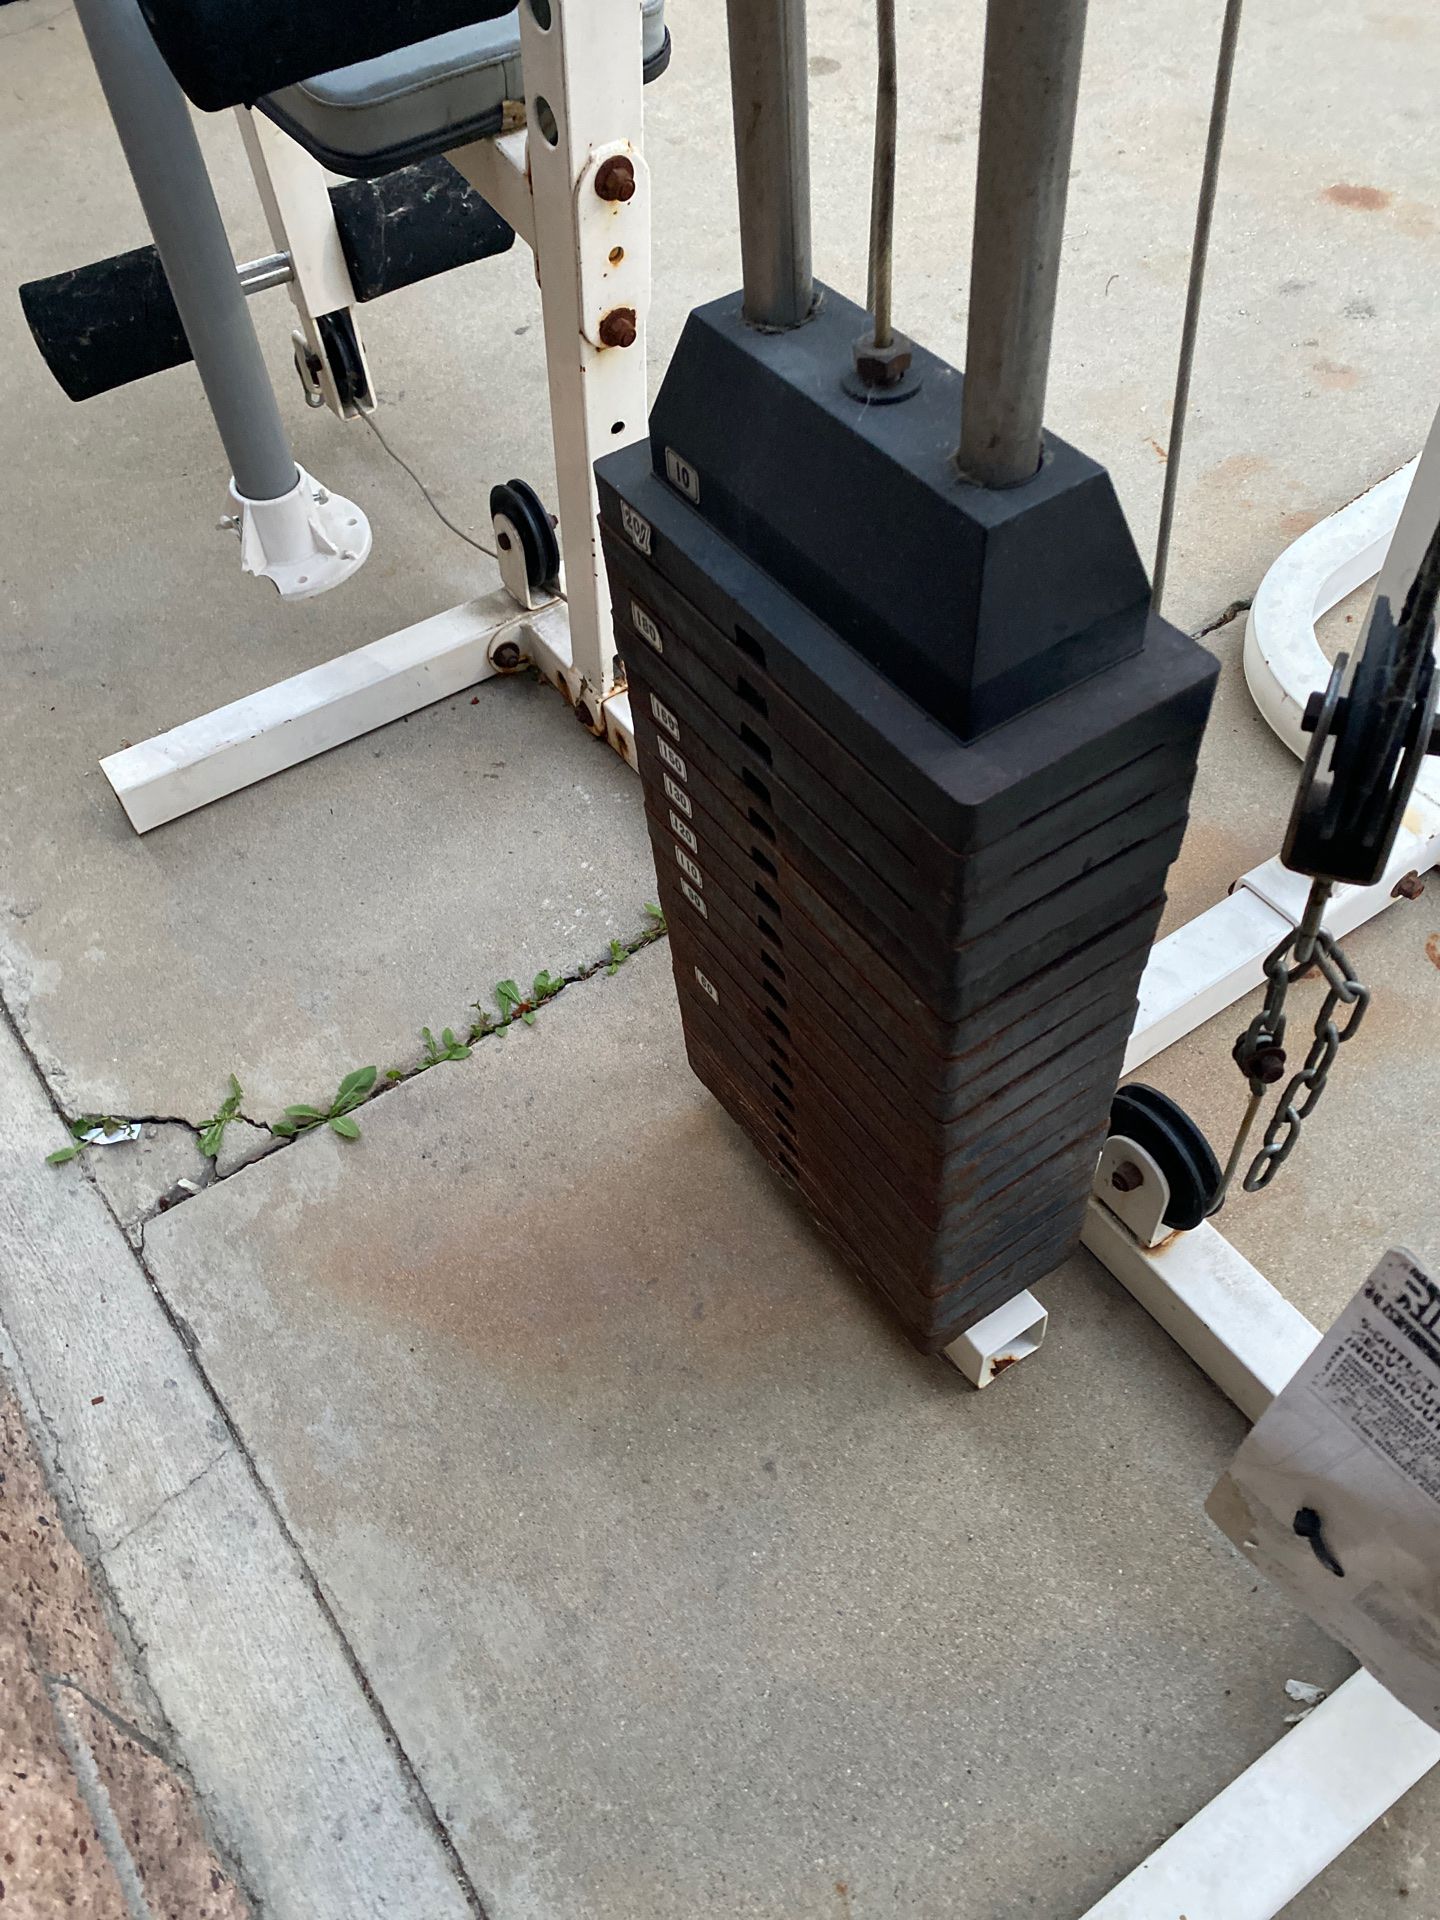 image-510-personal-fitness-system-for-sale-in-los-angeles-ca-offerup